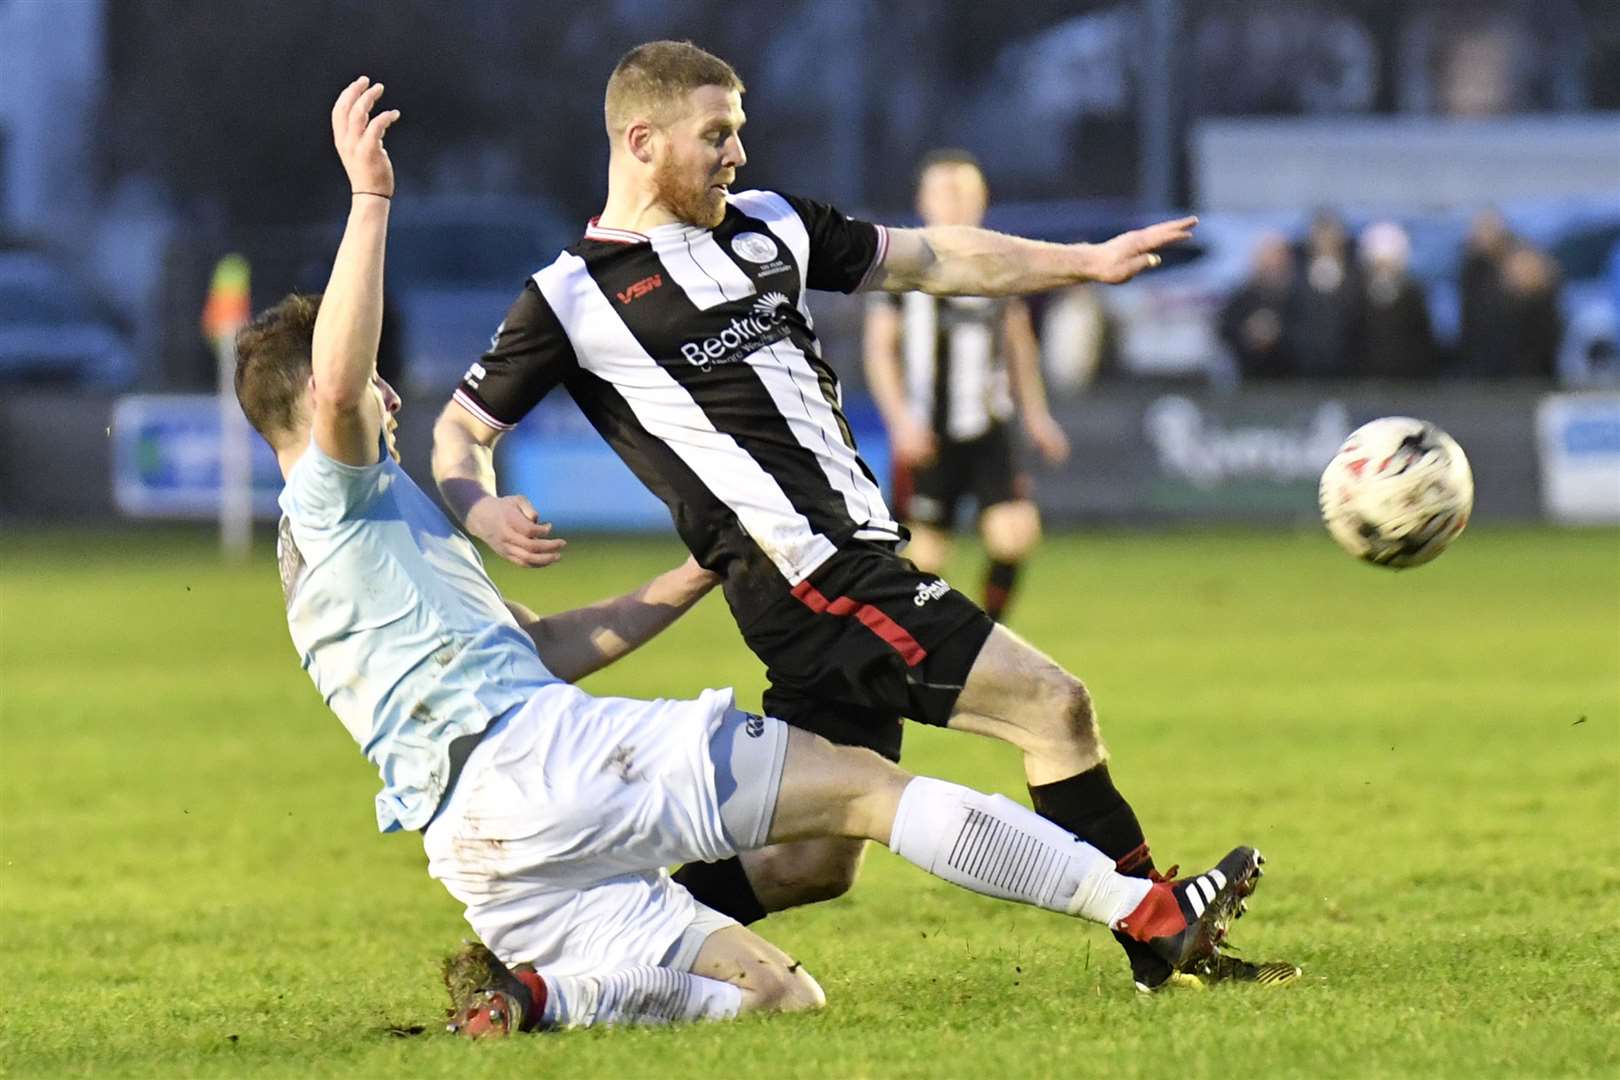 Fraserburgh's Bryan Hay challenges Davie Allan at Harmsworth Park earlier this year. Pat Miller sees Academy as having a special relationship with the Broch. Picture: Bob Roger